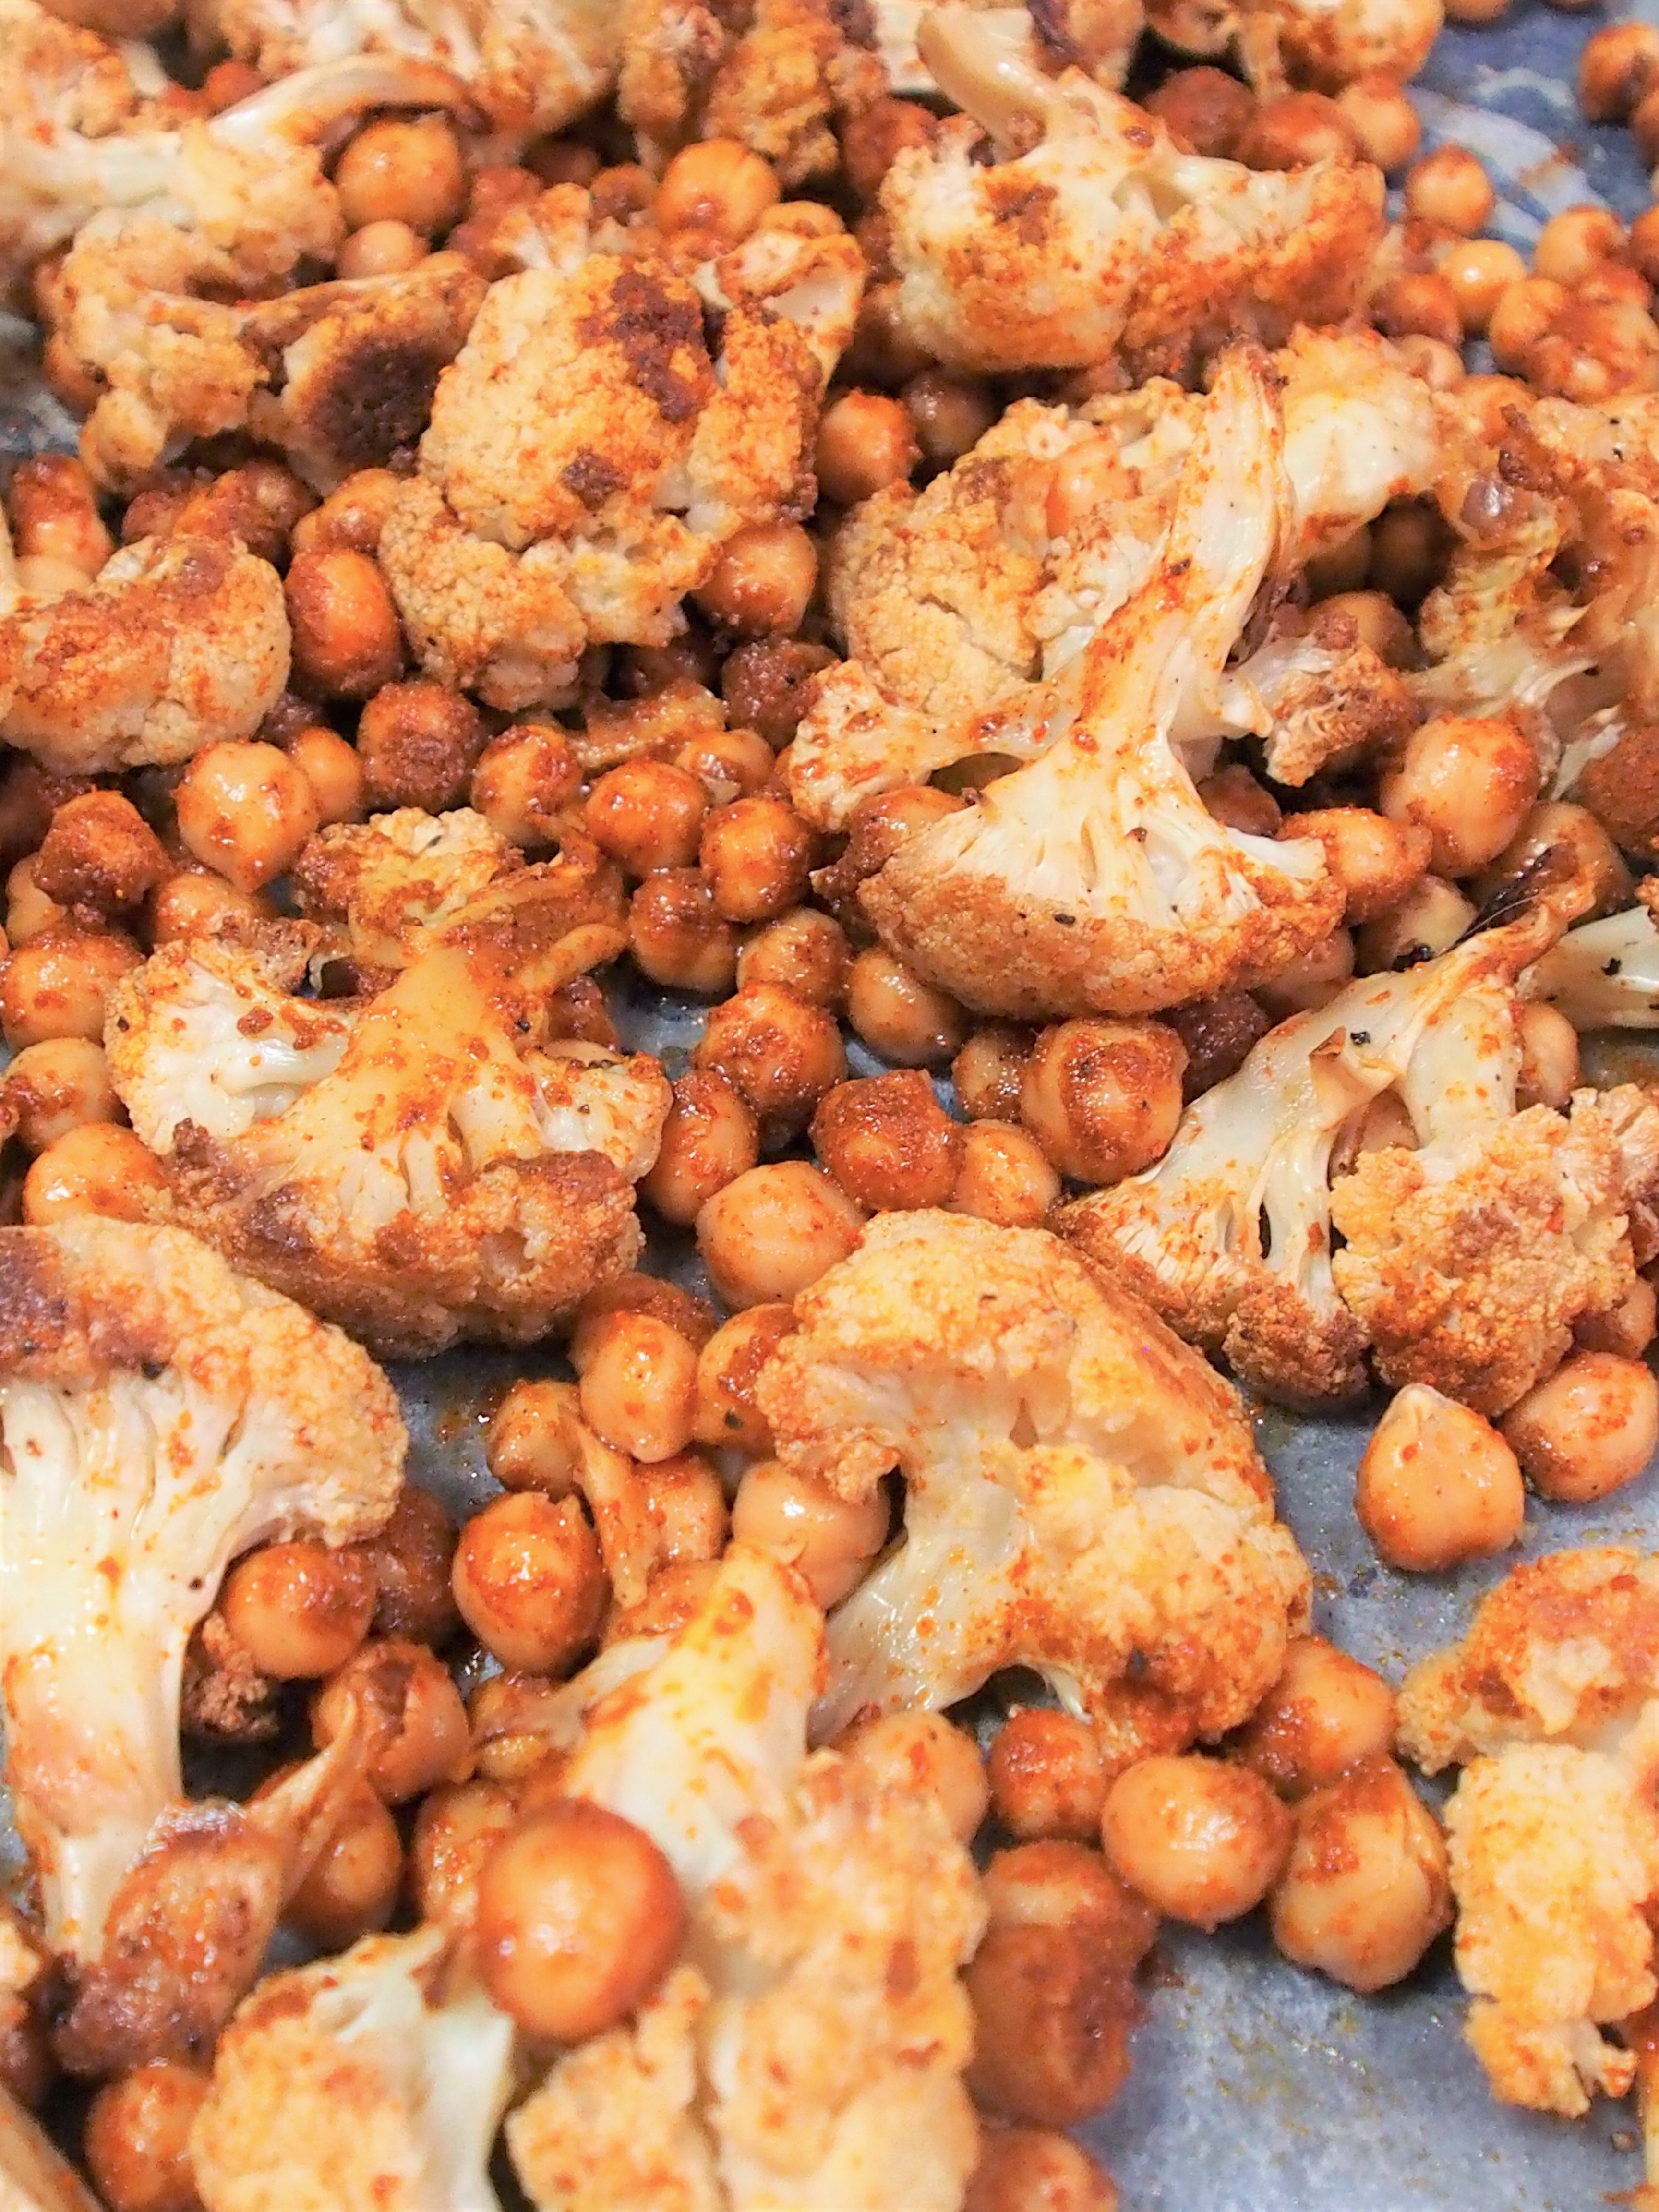 mmmmm.....roasted cauliflower and chickpeas with a most delicious spice blend....